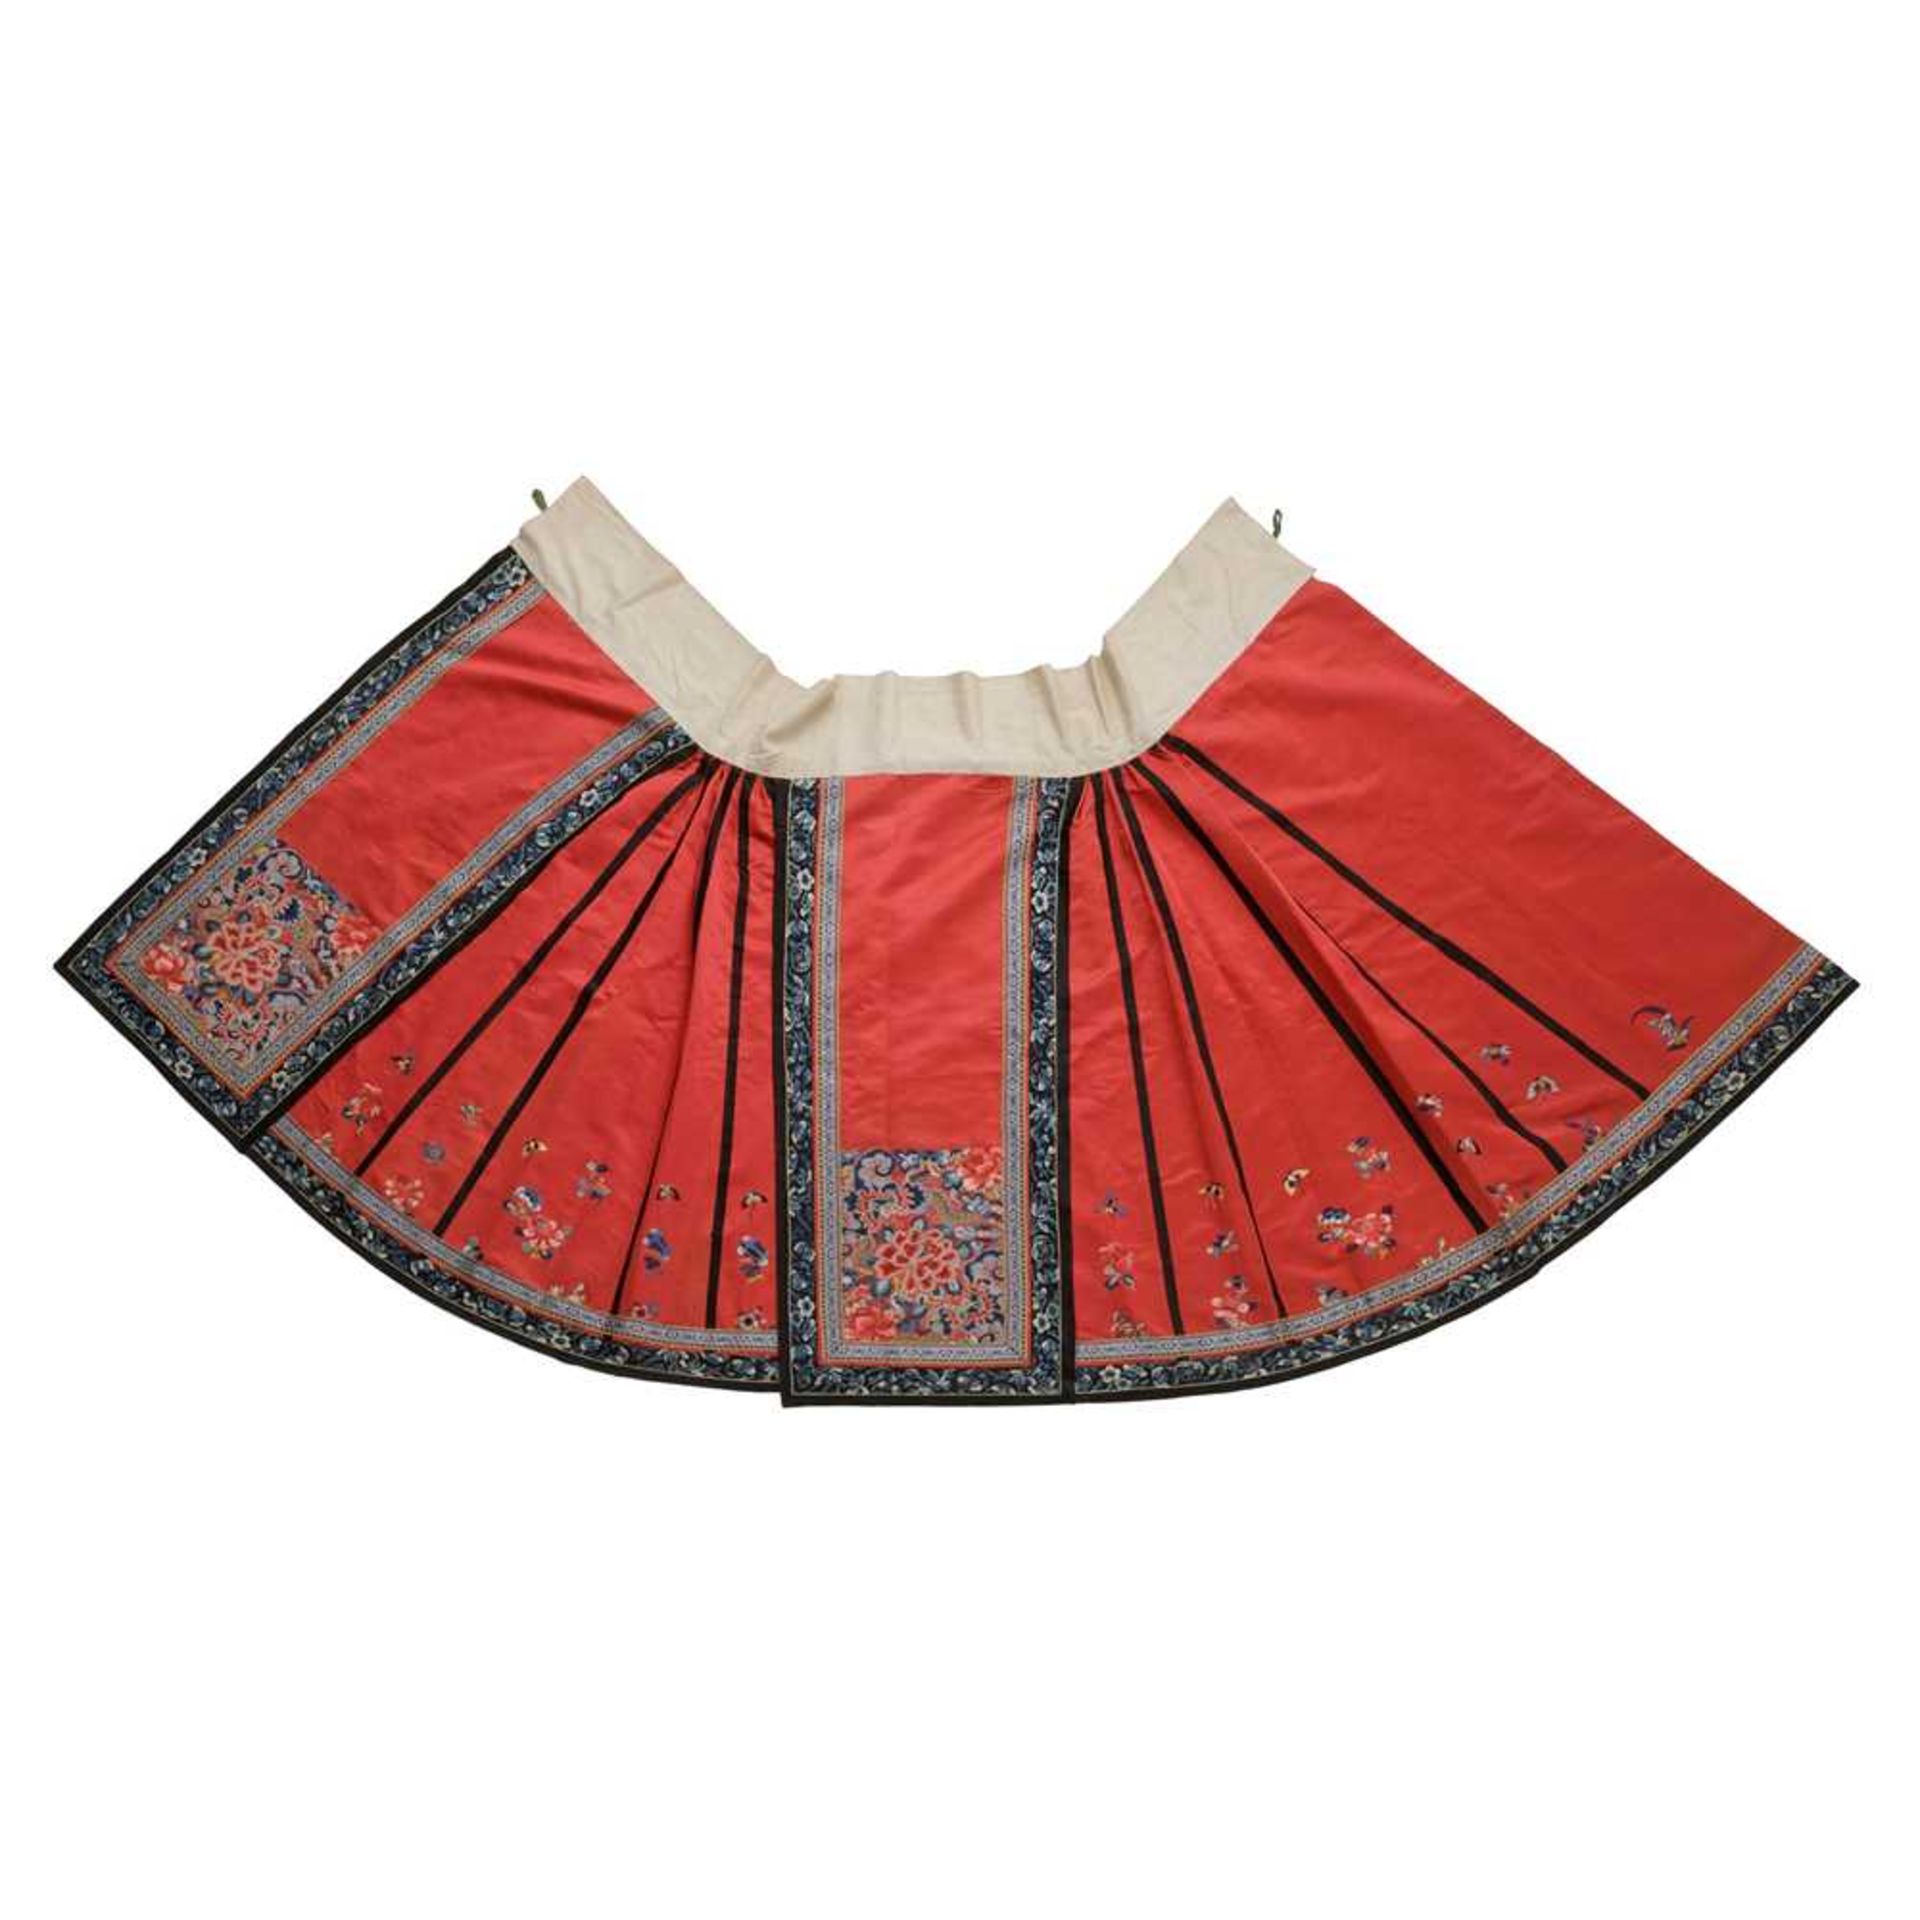 HAN CHINESE WOMAN'S EMBROIDERED RED SILK PLEATED SKIRT LATE QING DYNASTY-REPUBLIC PERIOD, 19TH-20TH - Image 3 of 3